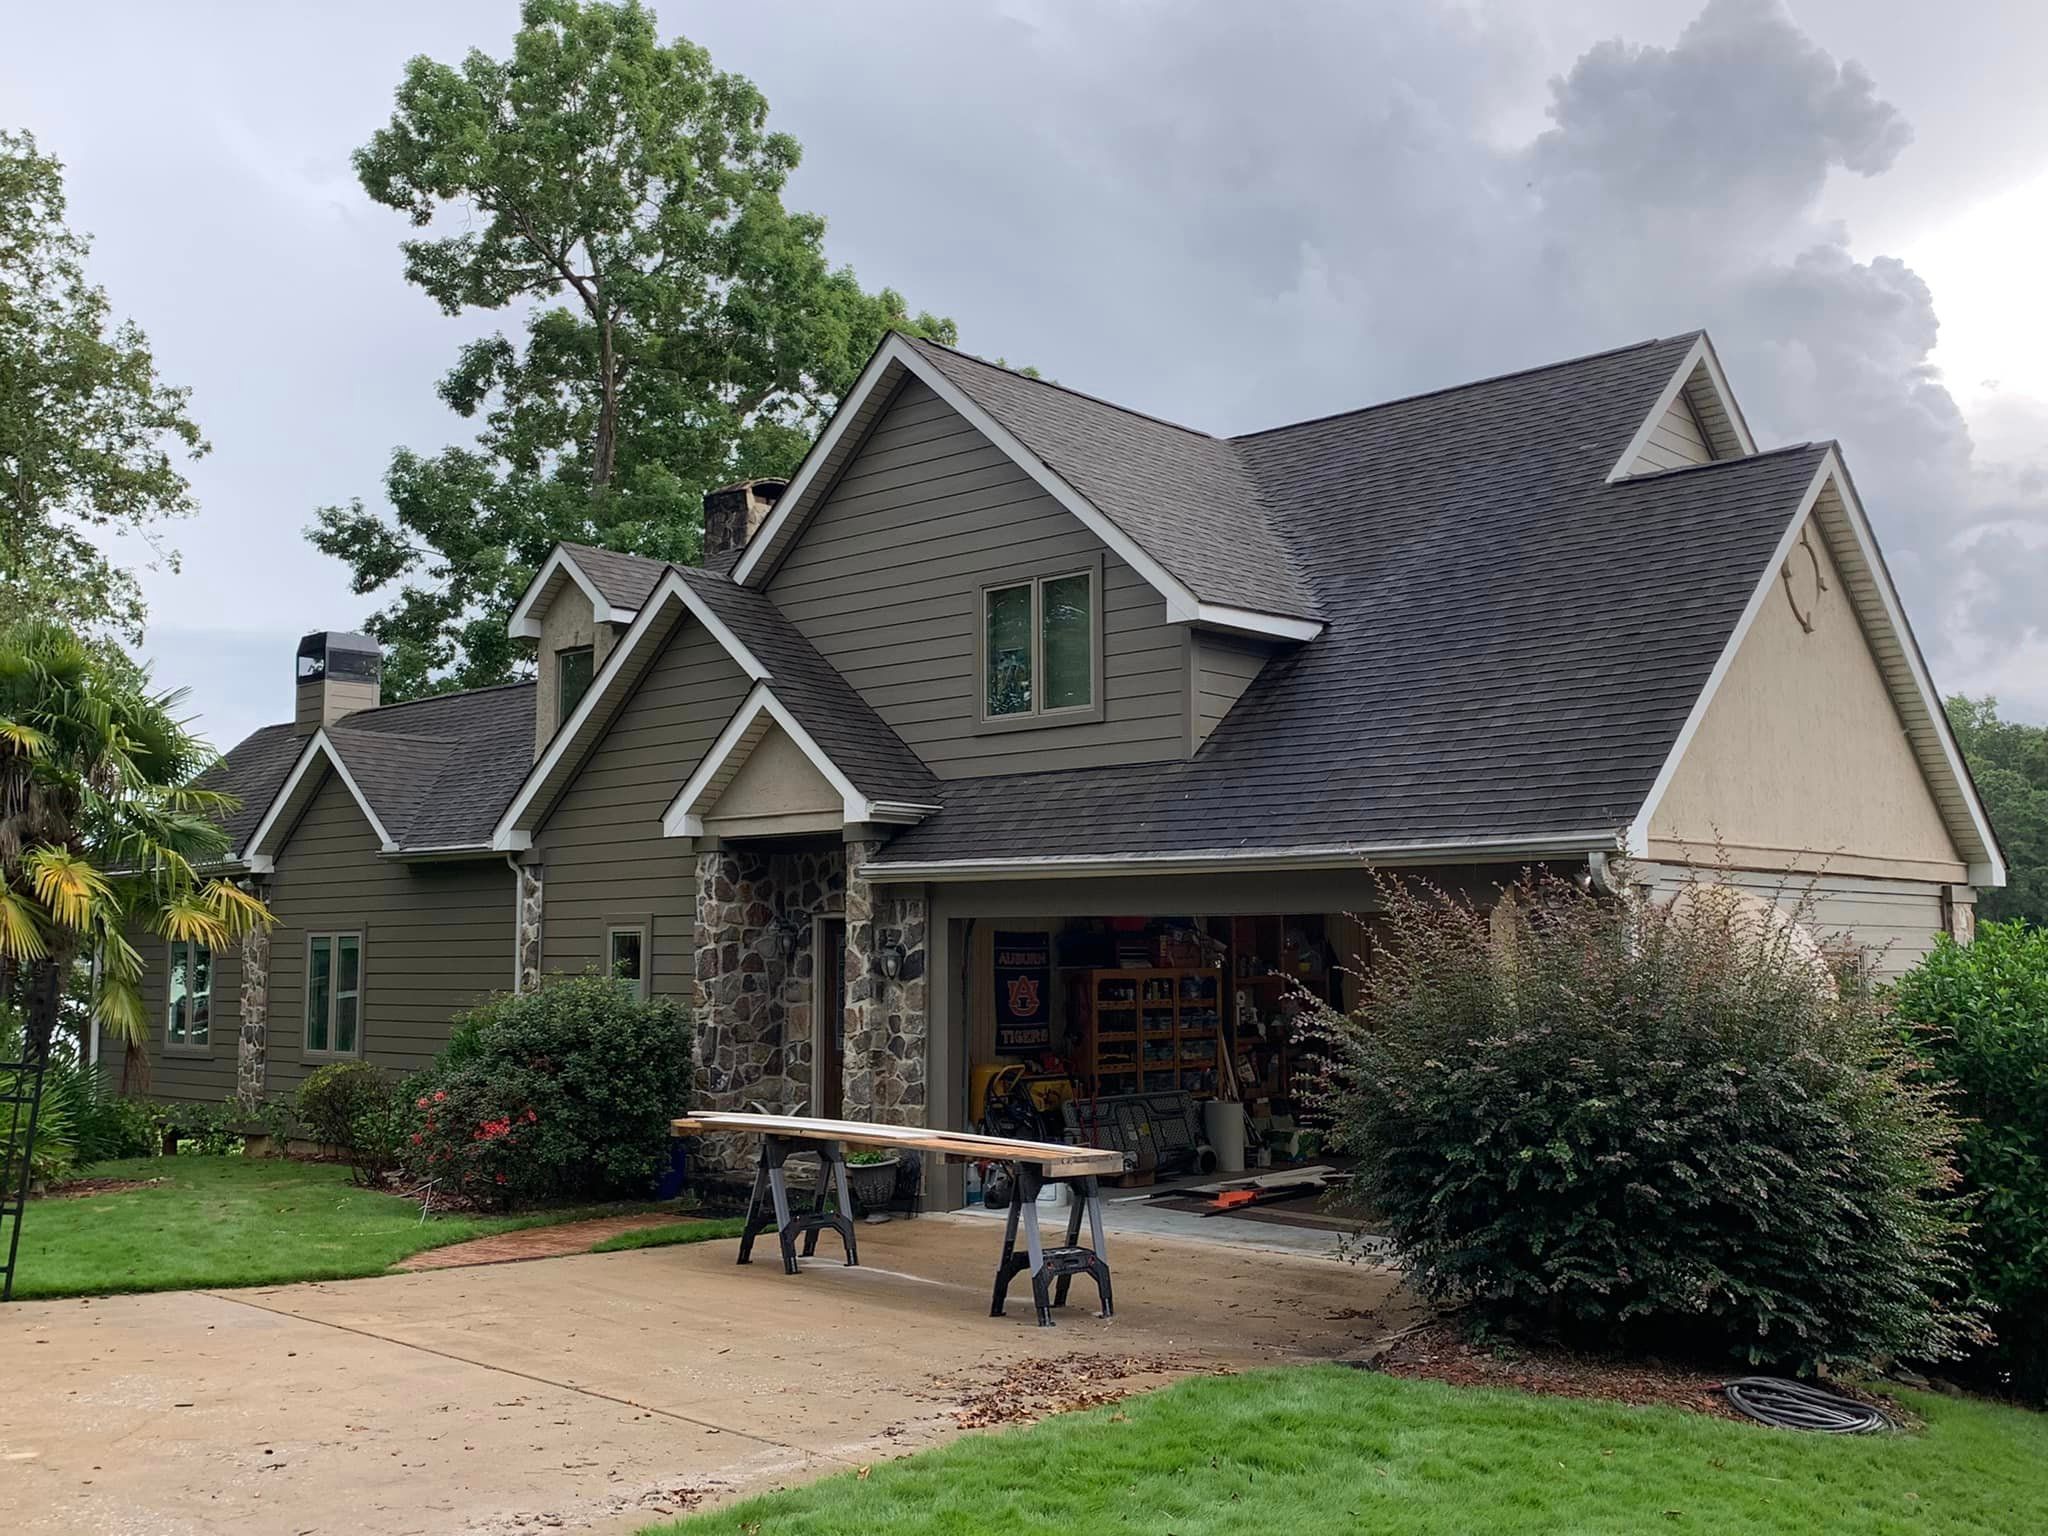 Roofing for A.D Roofing & Siding in Columbus, GA